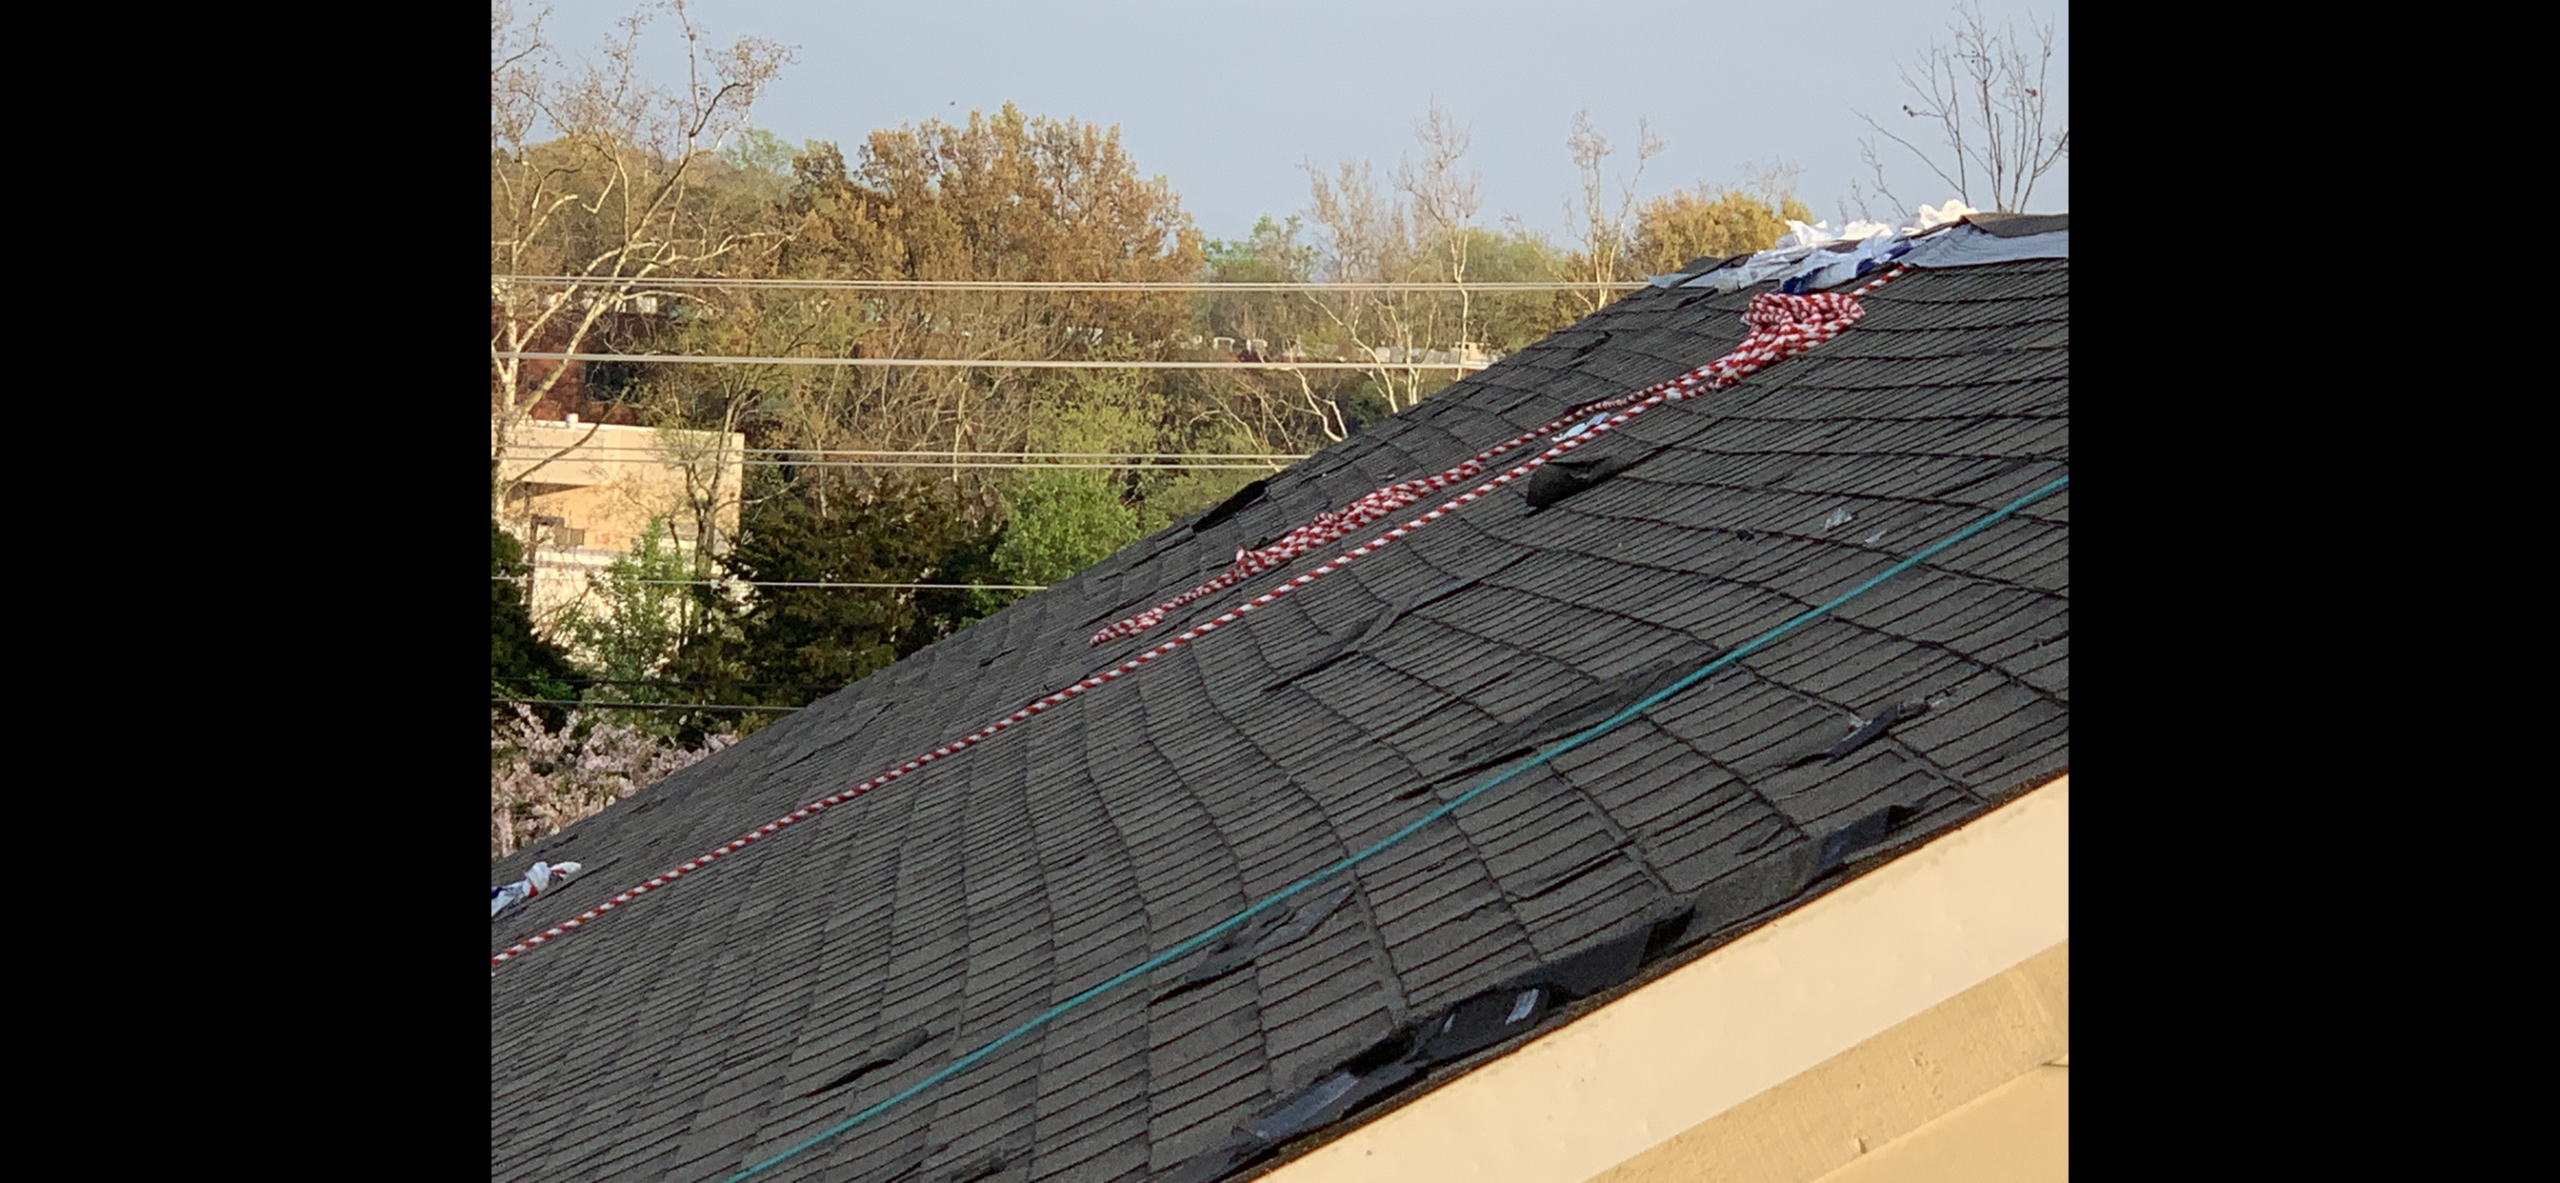 This is a view of darker shingles being installed.